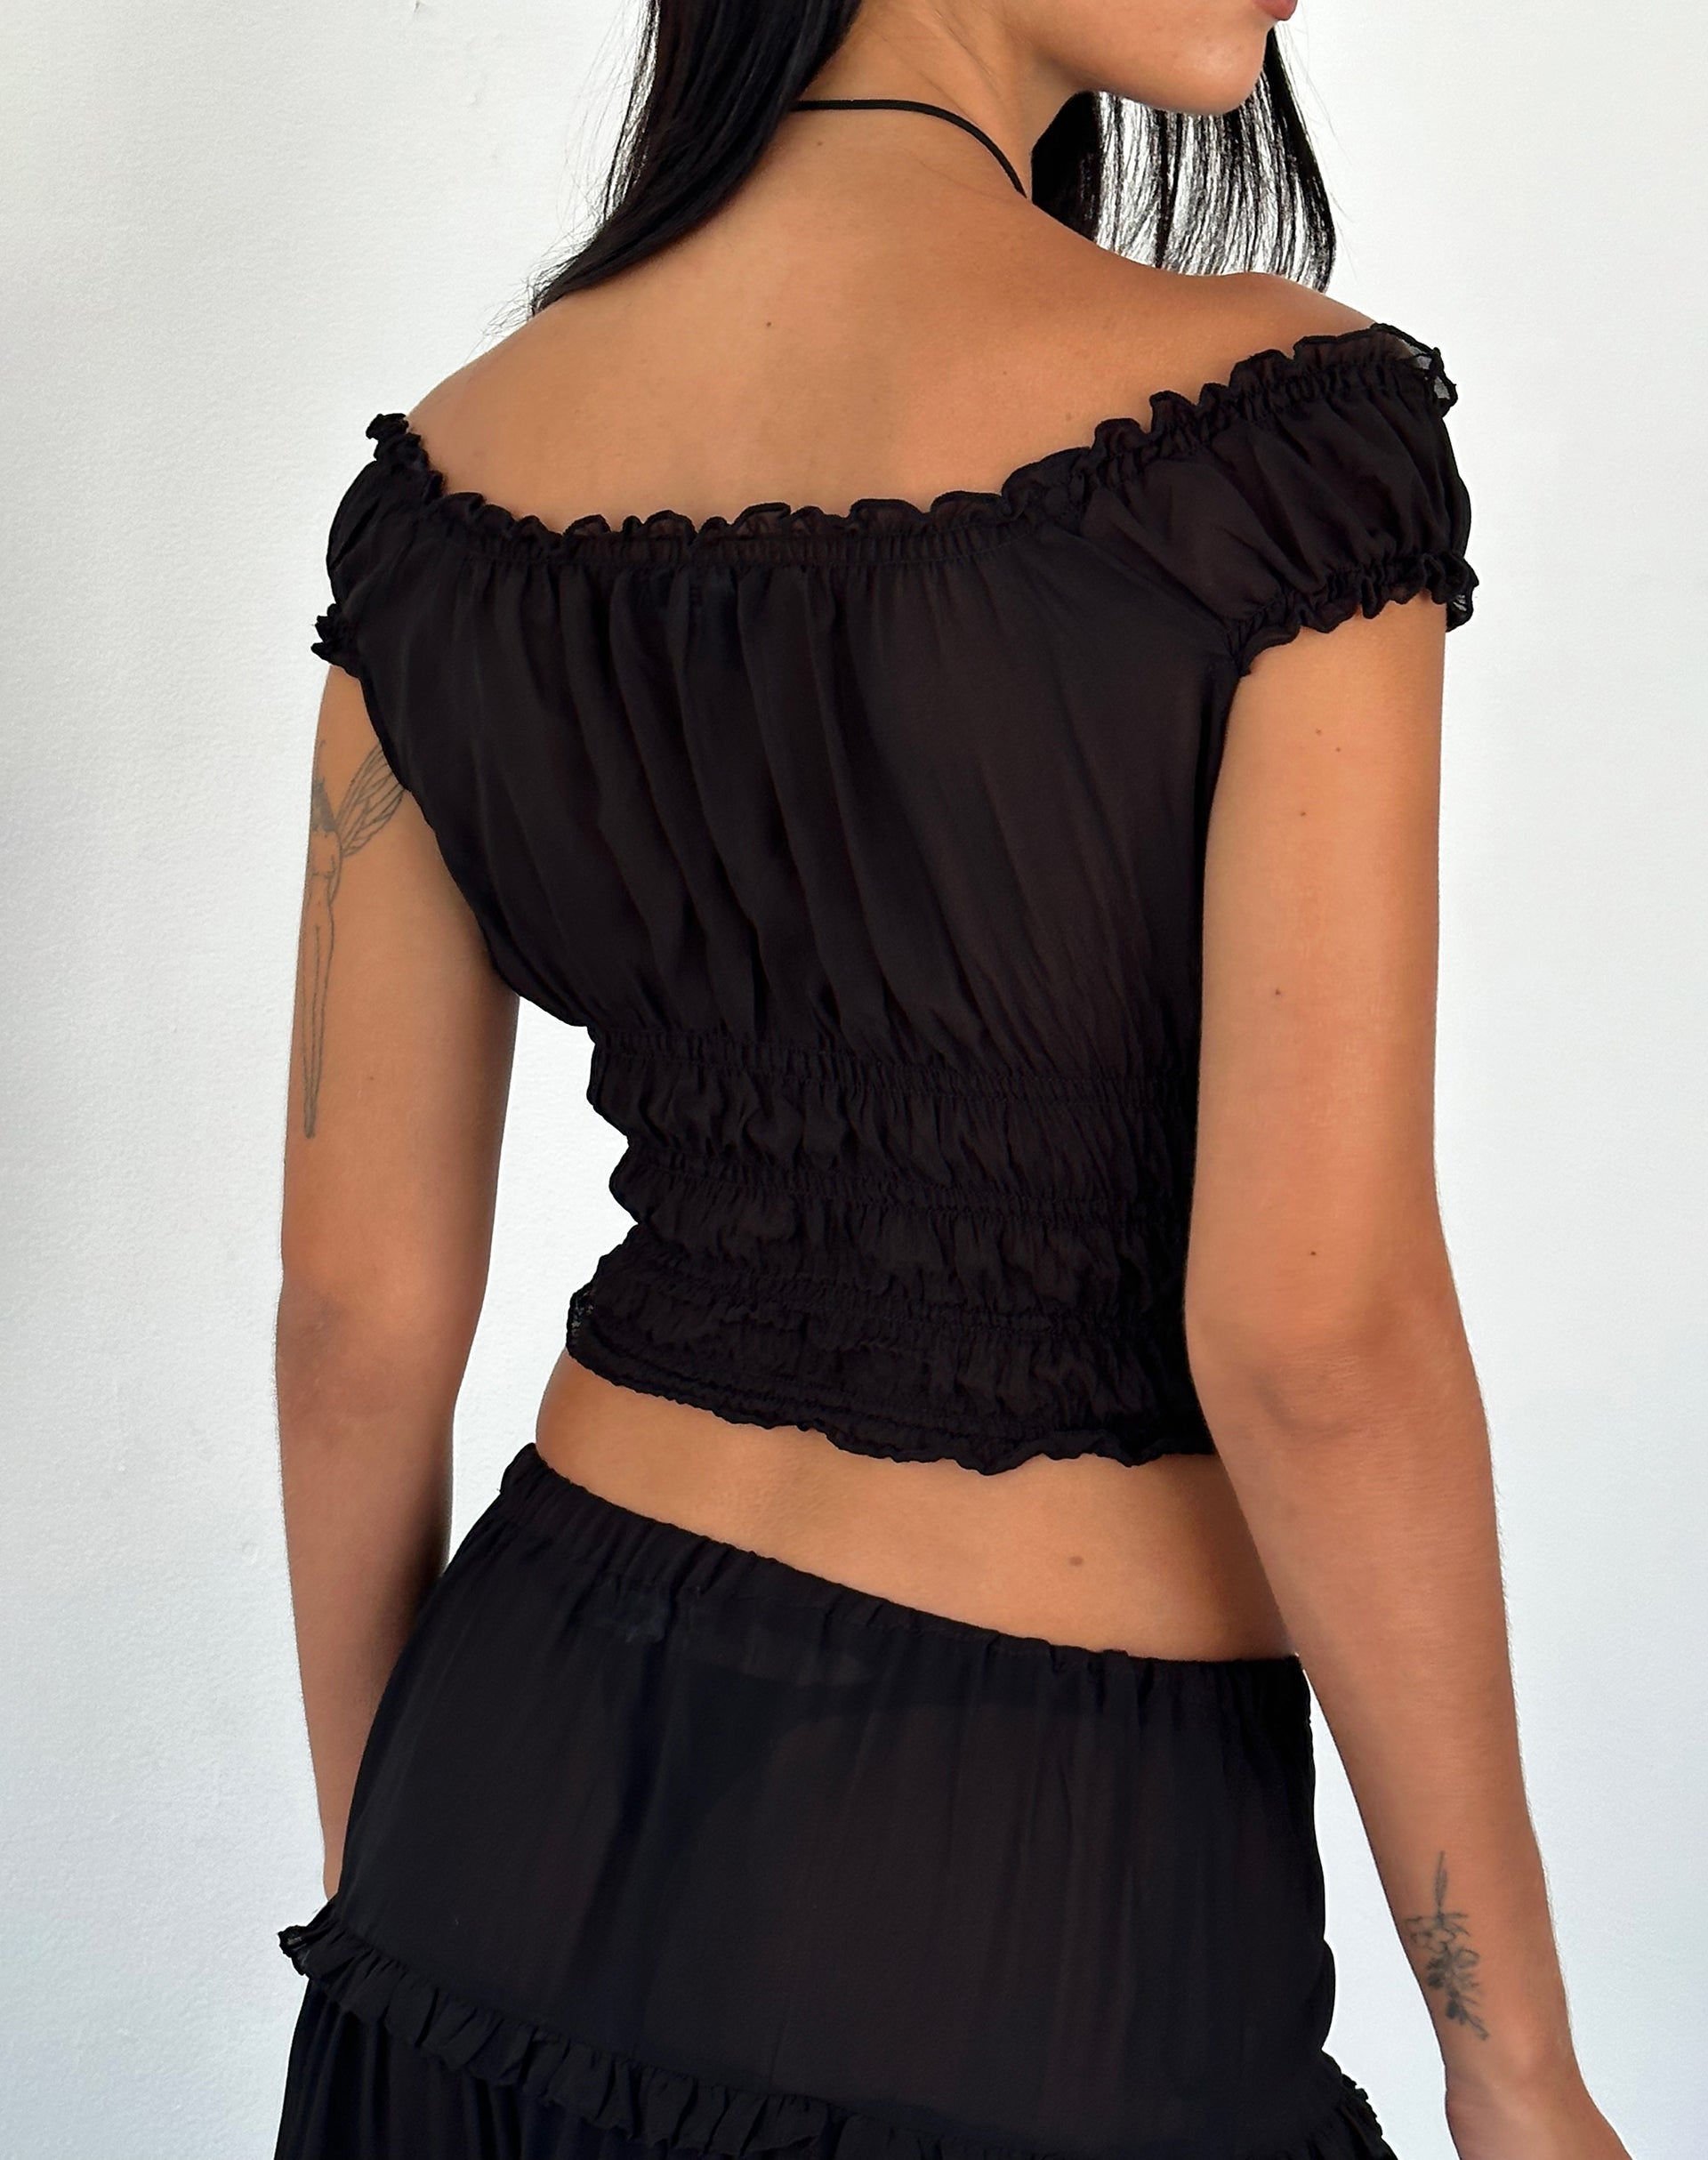 Dima Bow Cami Top in Black with White Binding